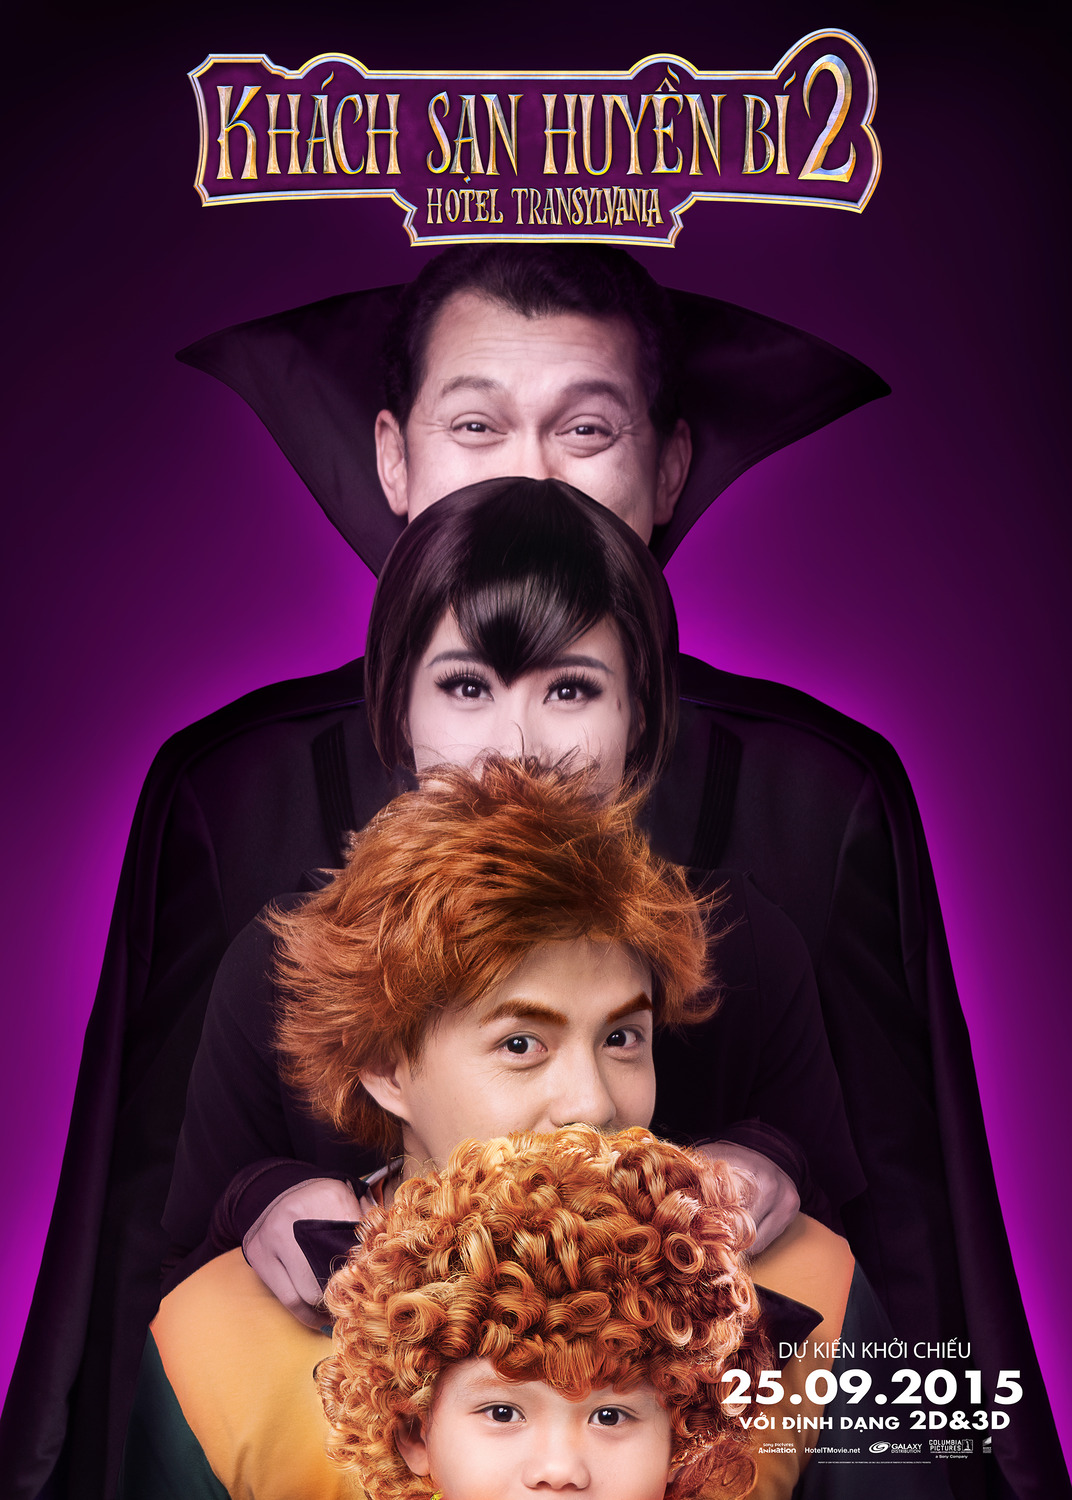 Extra Large Movie Poster Image for Hotel Transylvania 2 (#25 of 29)